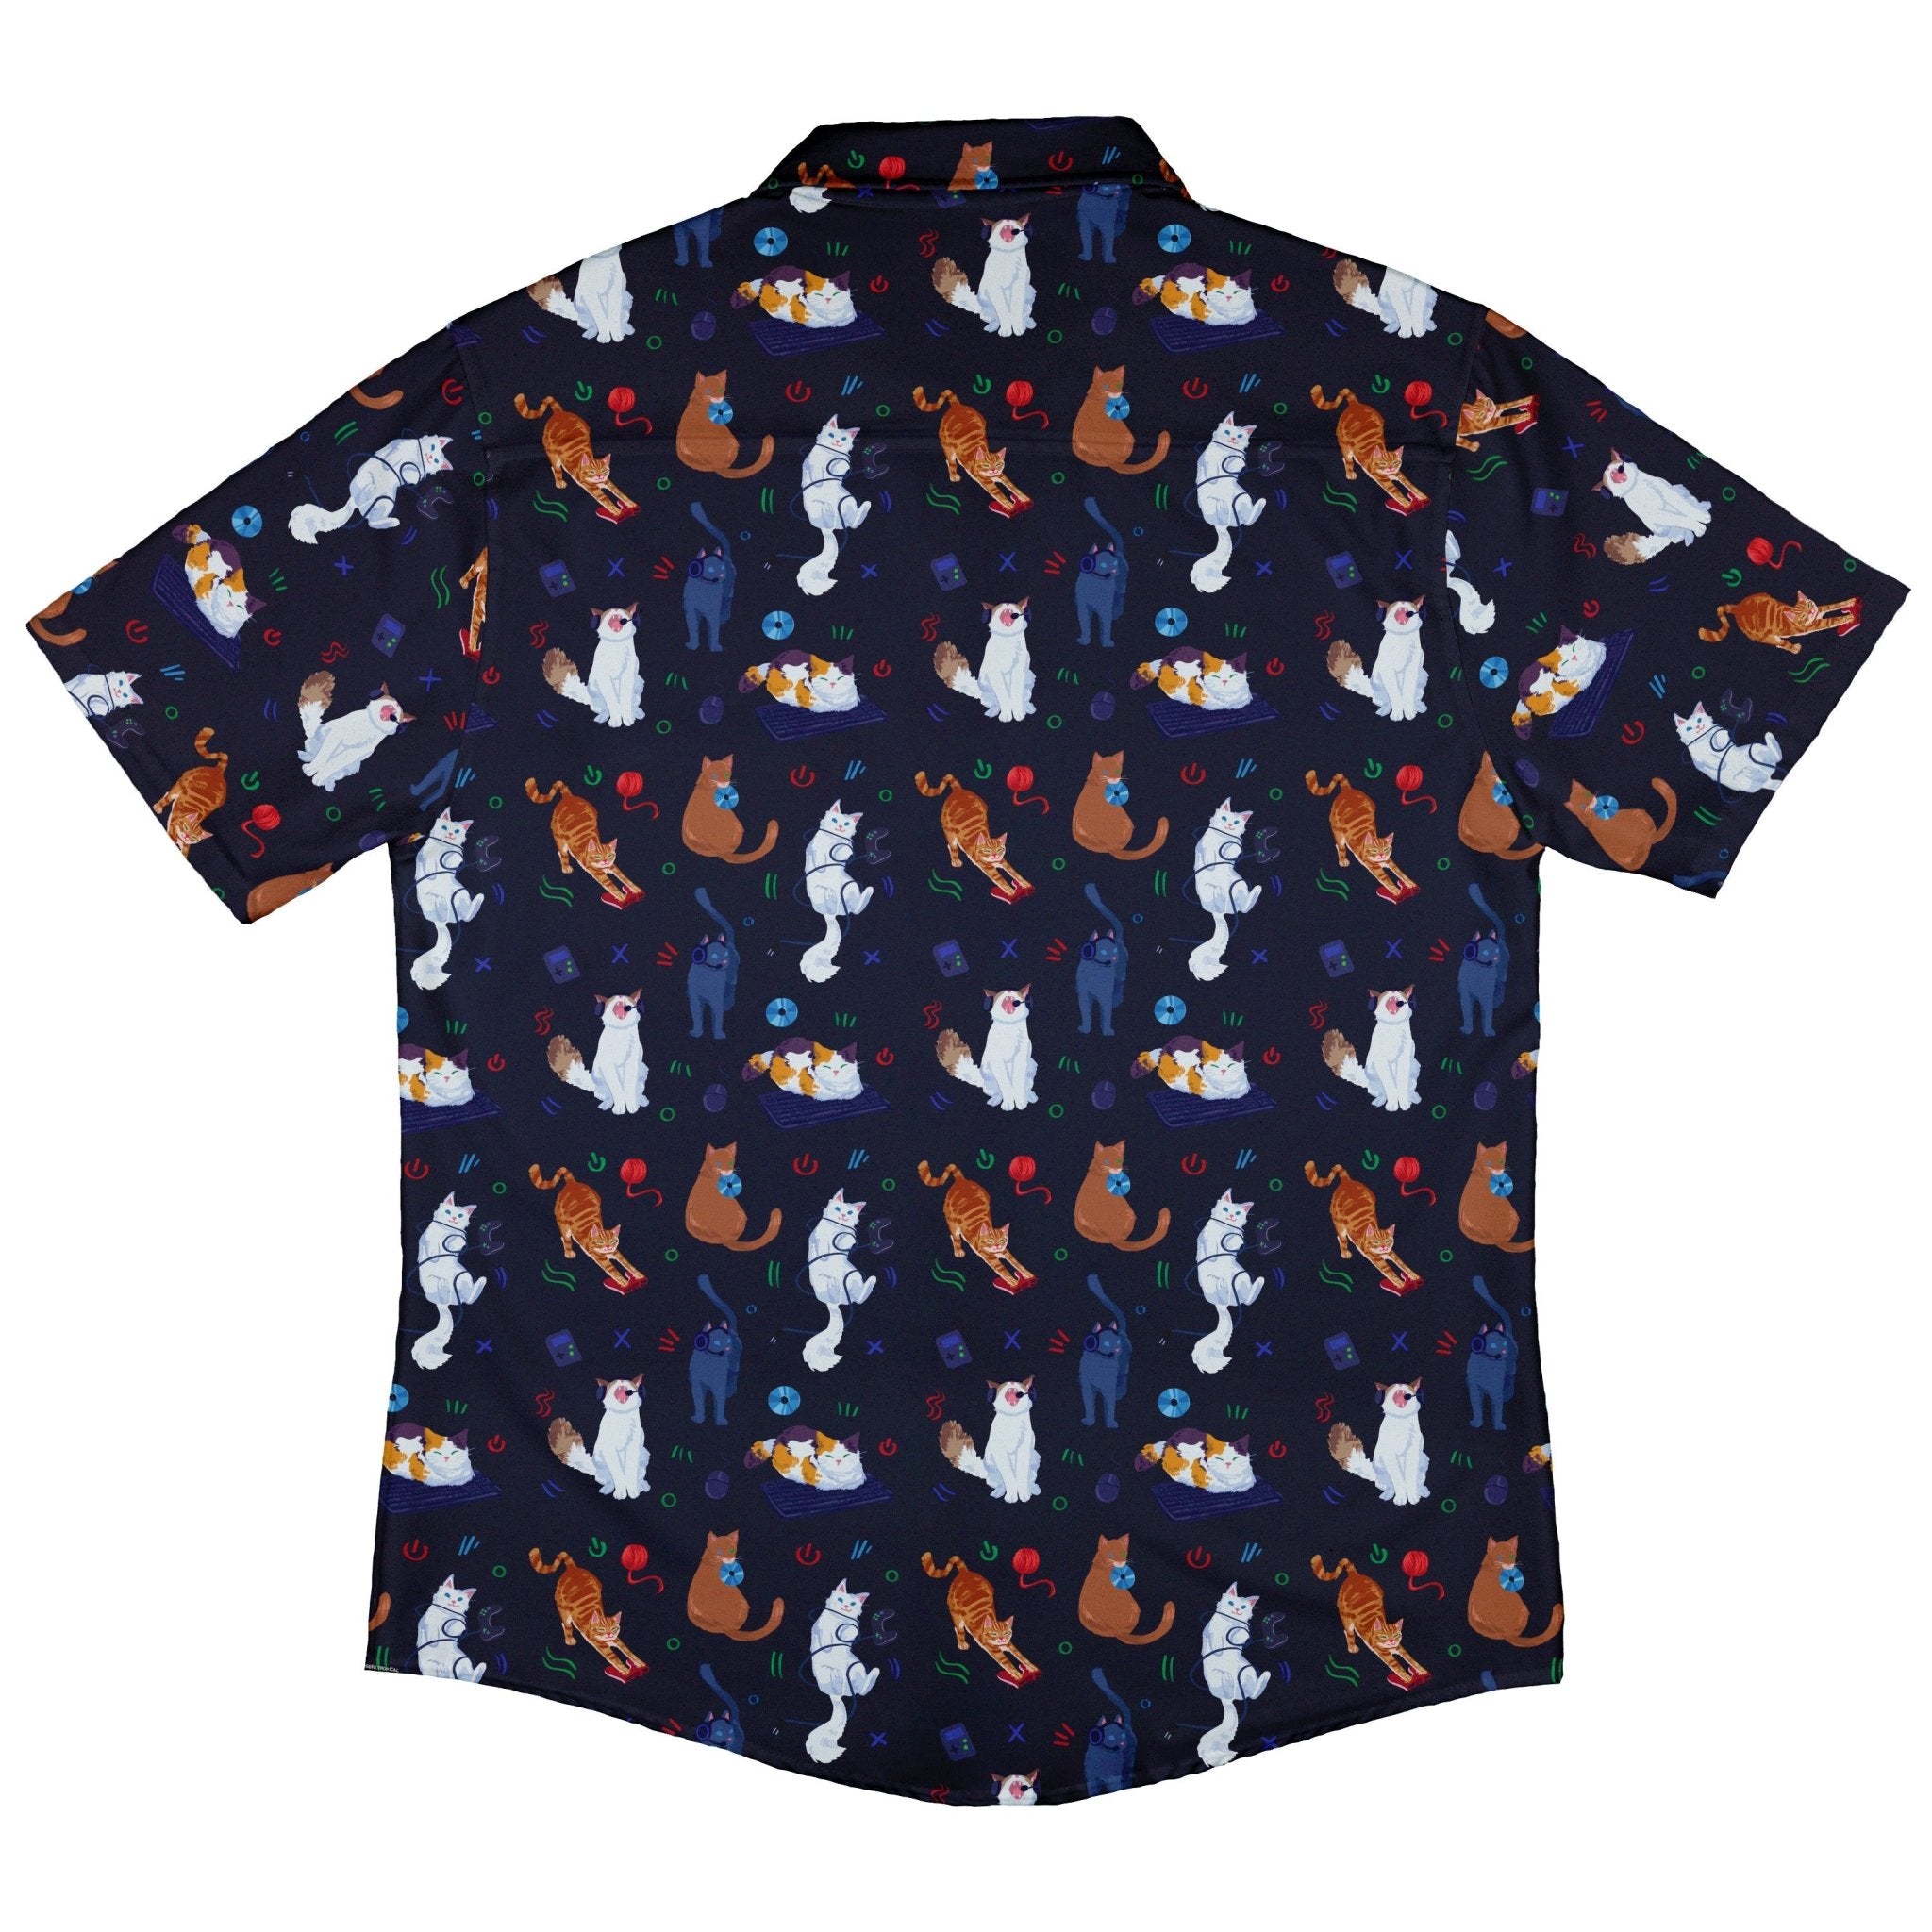 Video Game Cats Dark Button Up Shirt - adult sizing - Animal Patterns - Design by Claire Murphy